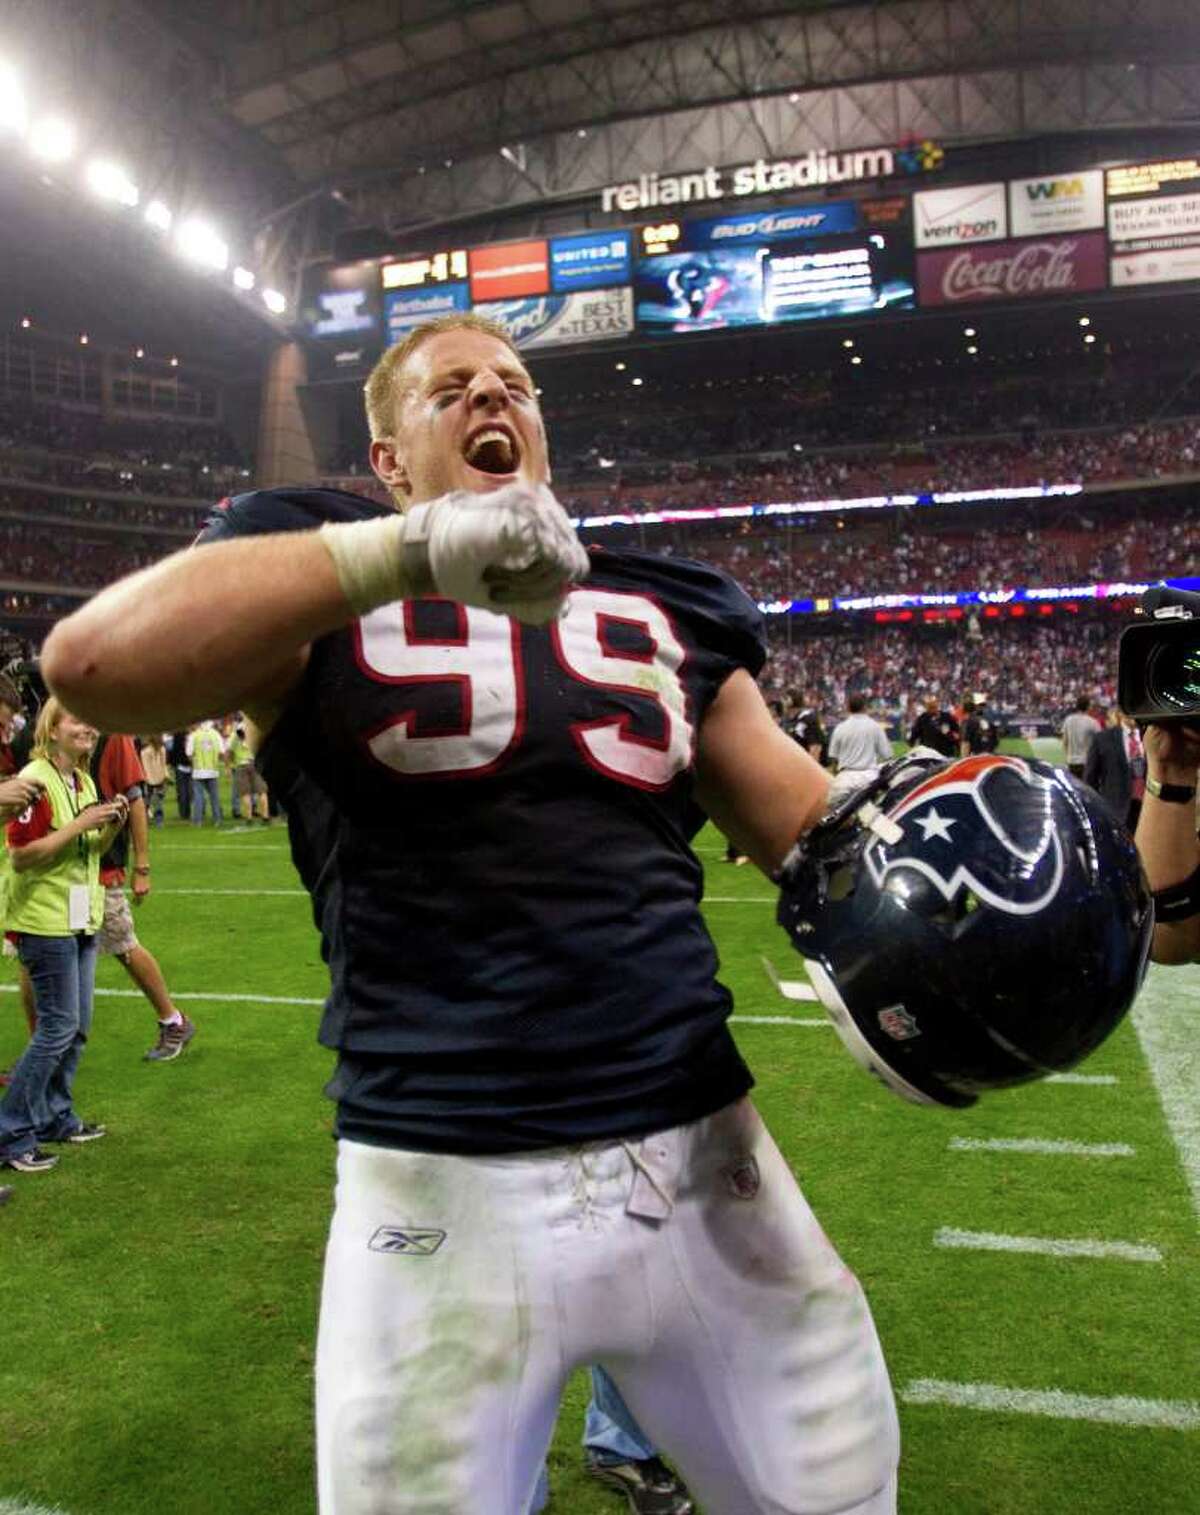 Houston Texans defensive end J.J. Watt celebrates the Texans win over the Cincinnati Bengals in an AFC wildcard playoff football game at Reliant Stadium on Saturday, Jan. 7, 2012, in Houston. The Texans beat the Bengals 31-10.